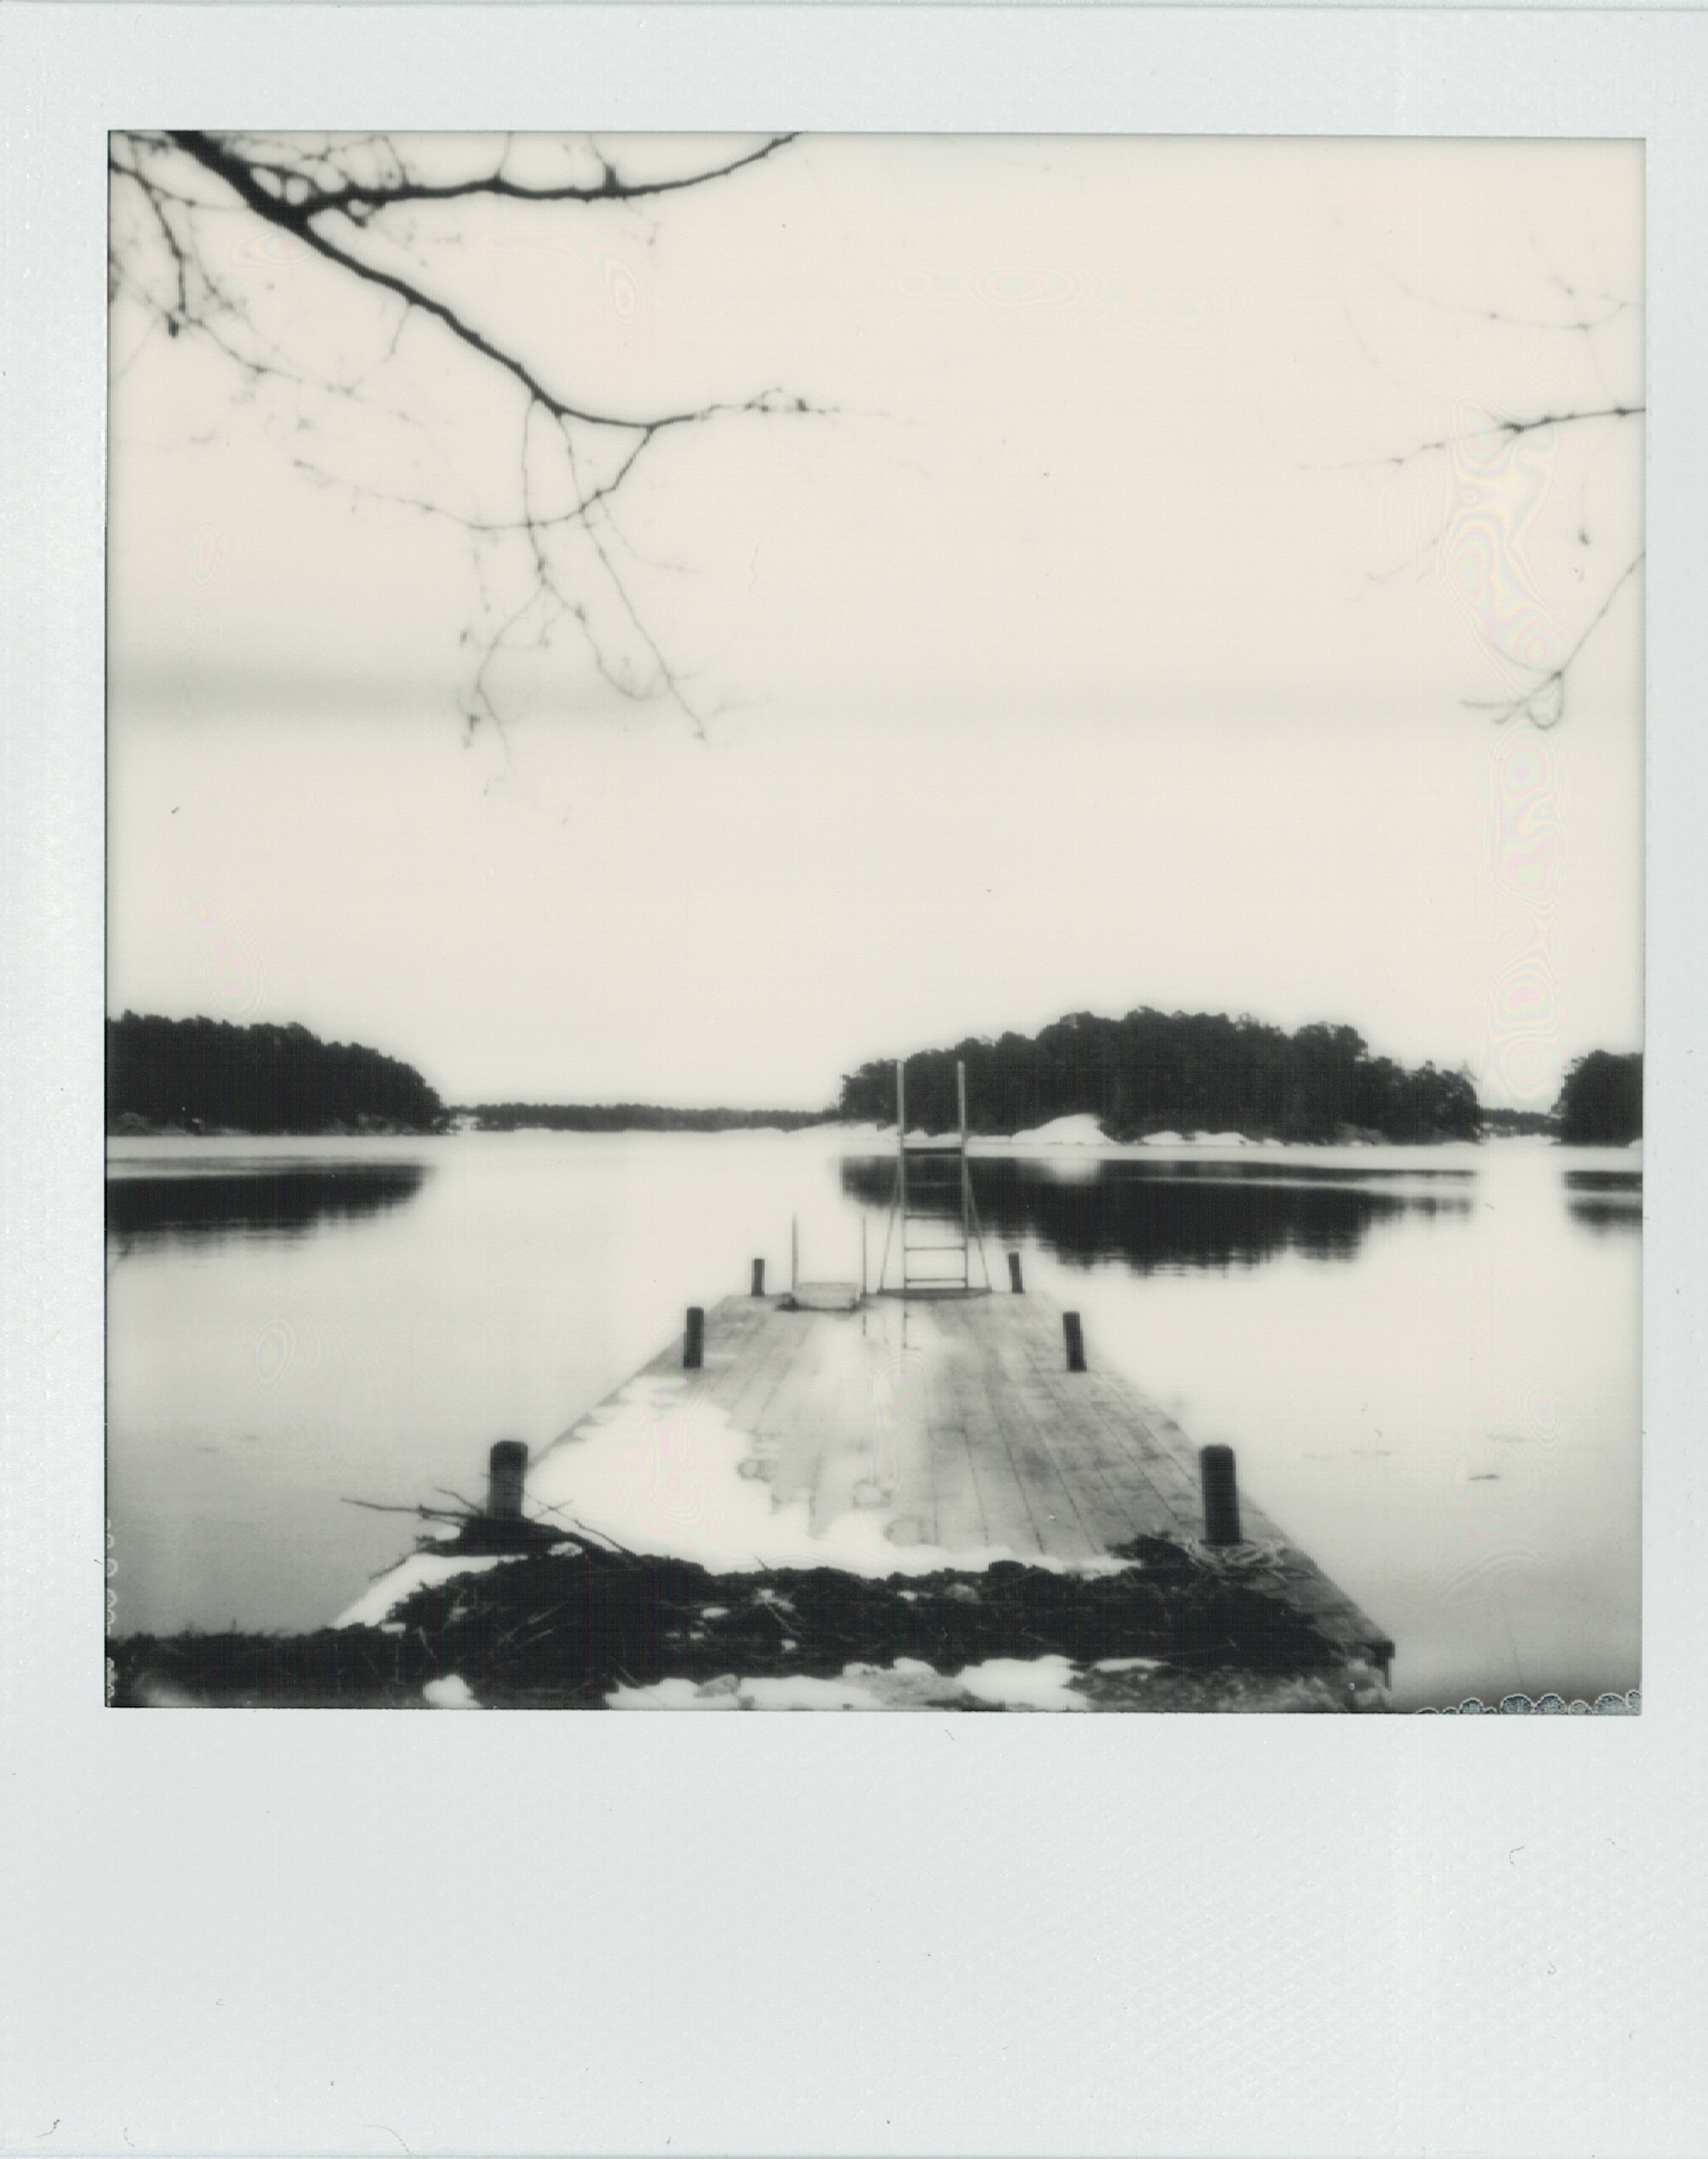 Pier | SX-70 | Impossible Project Black and White SX-70 film | Ioana Taut